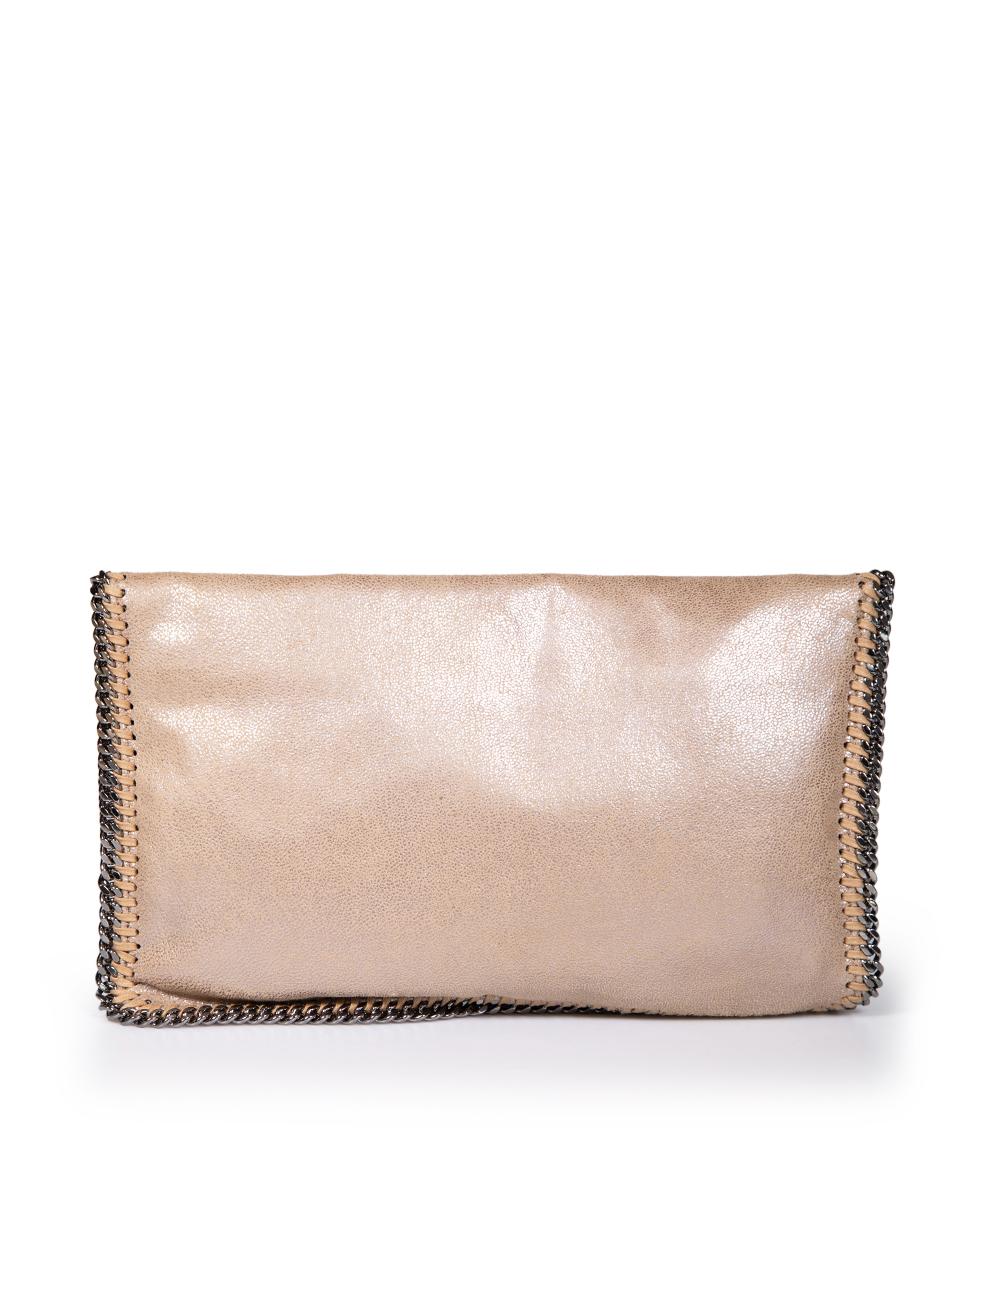 Stella McCartney Light Brown Faux Leather Falabella Clutch In Good Condition For Sale In London, GB